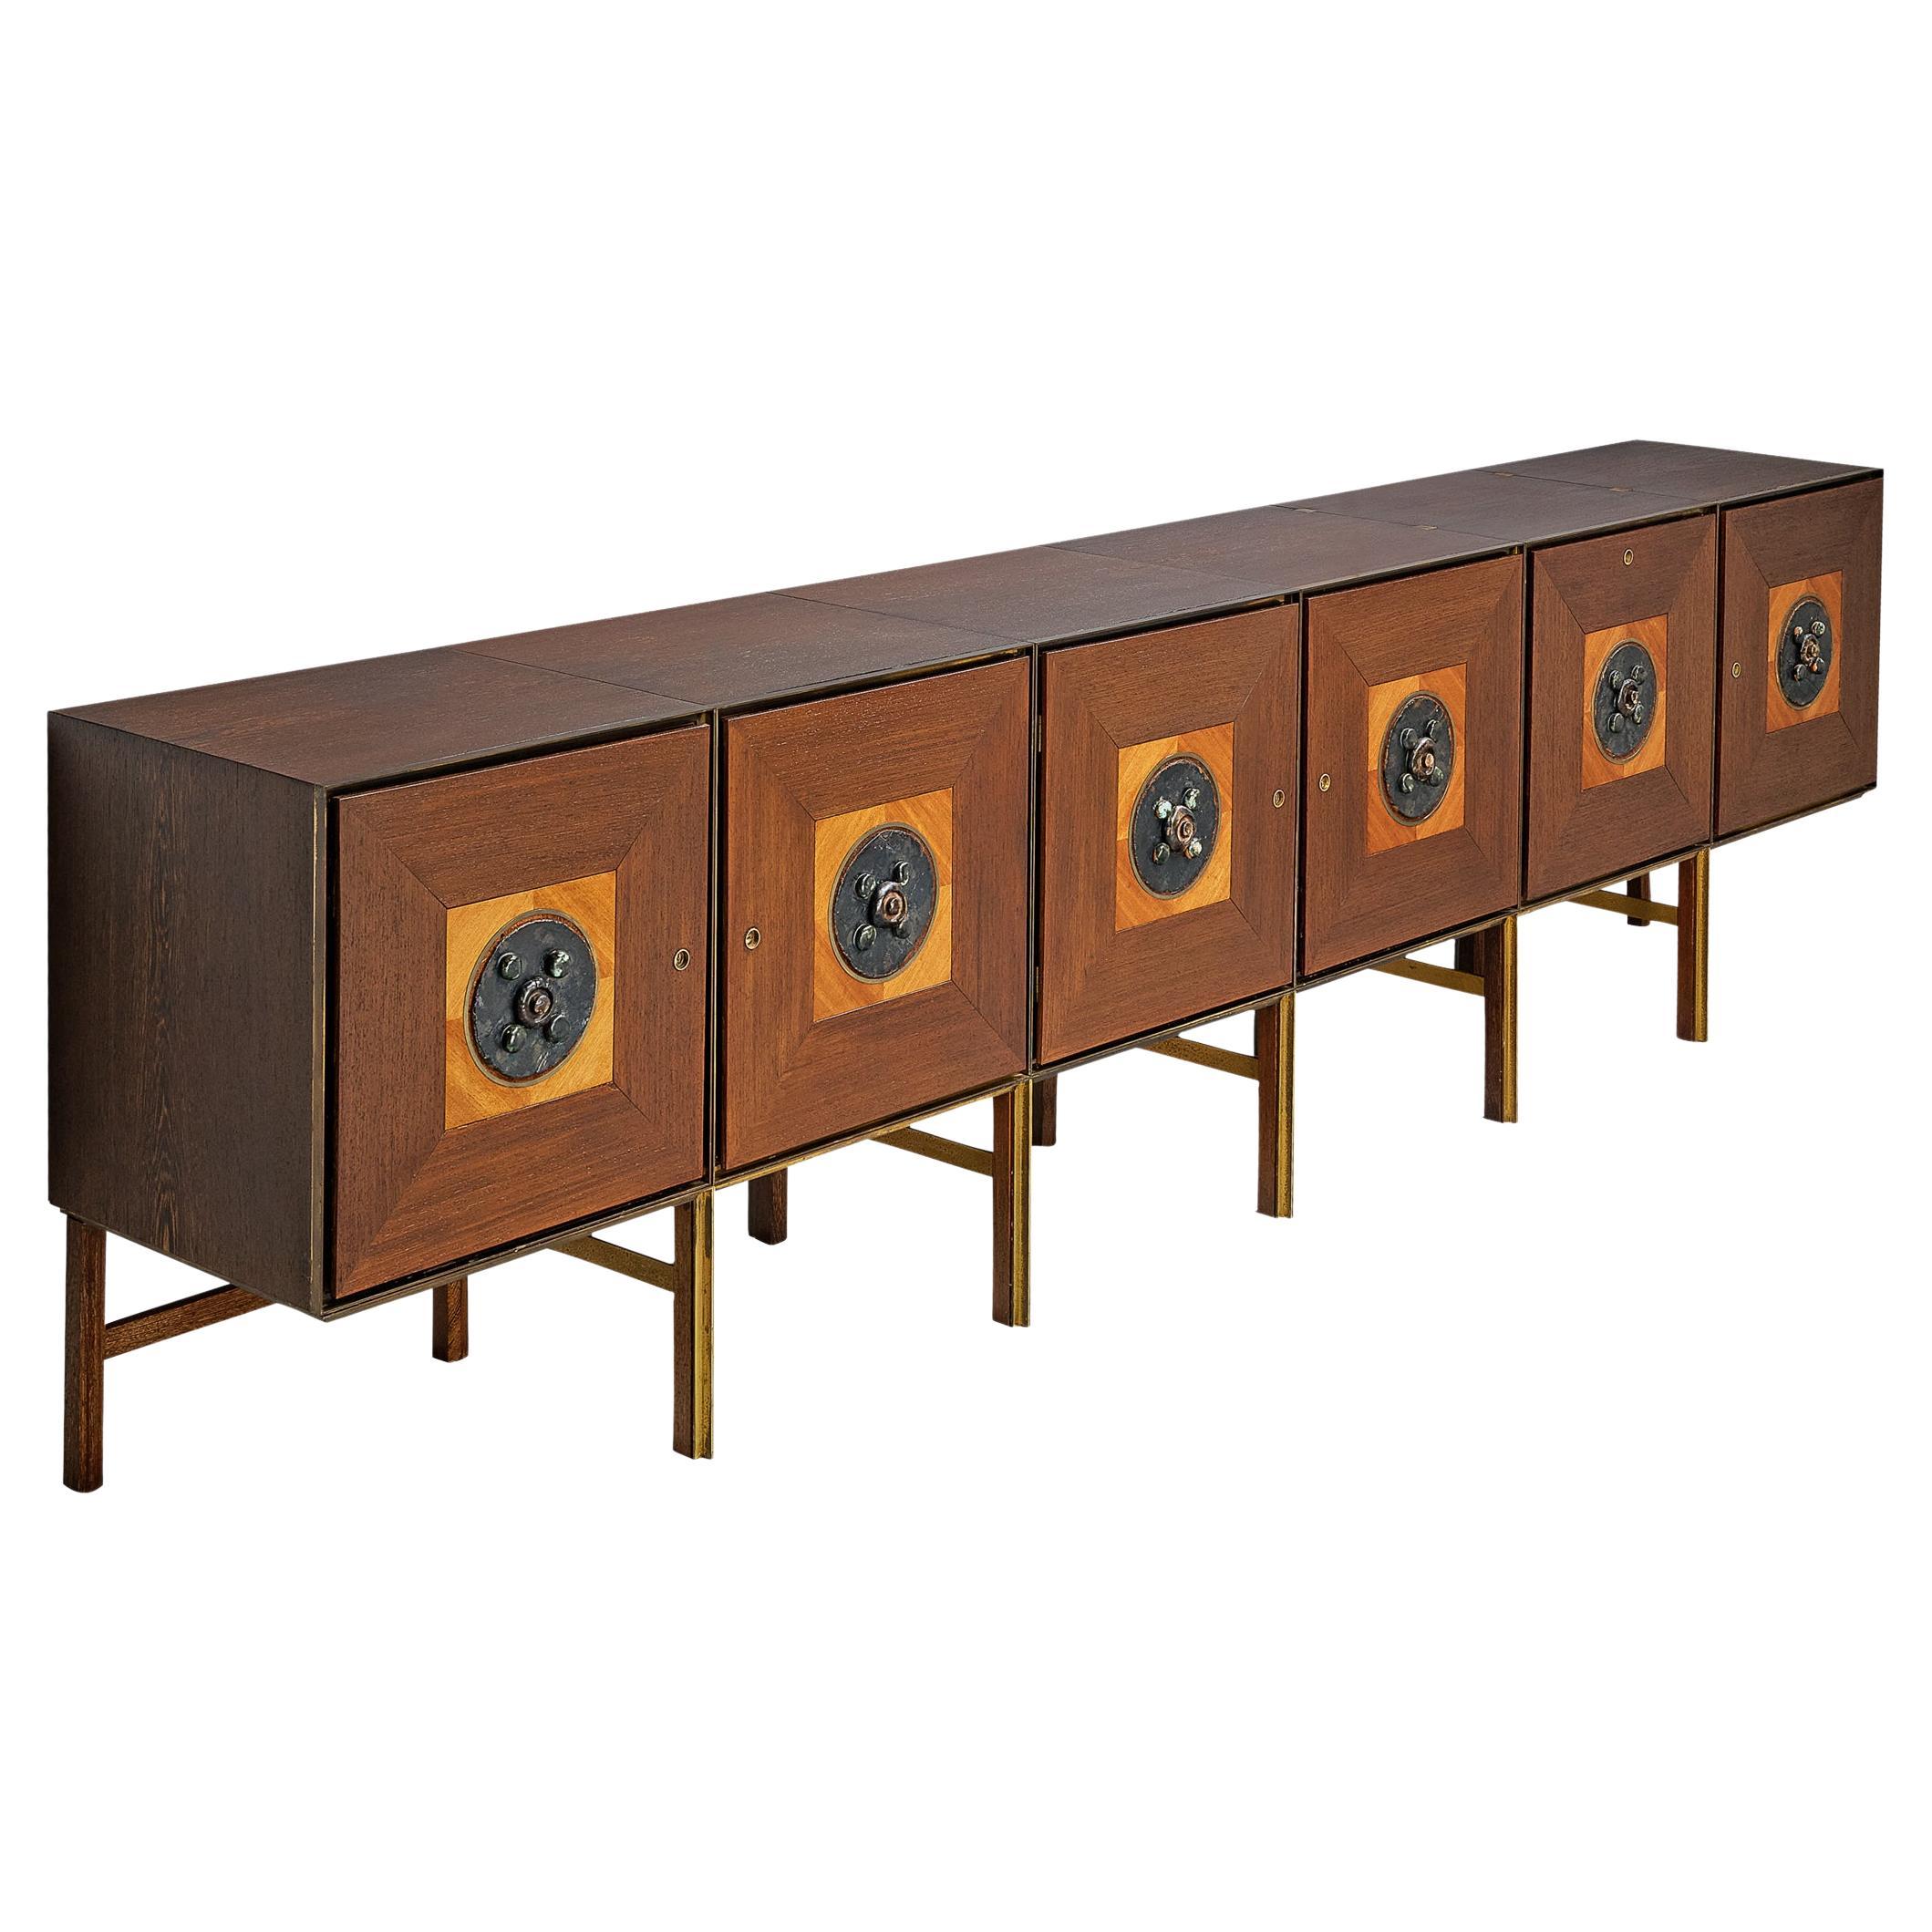 Exceptional Flemish Sideboard in Wenge and Ceramics